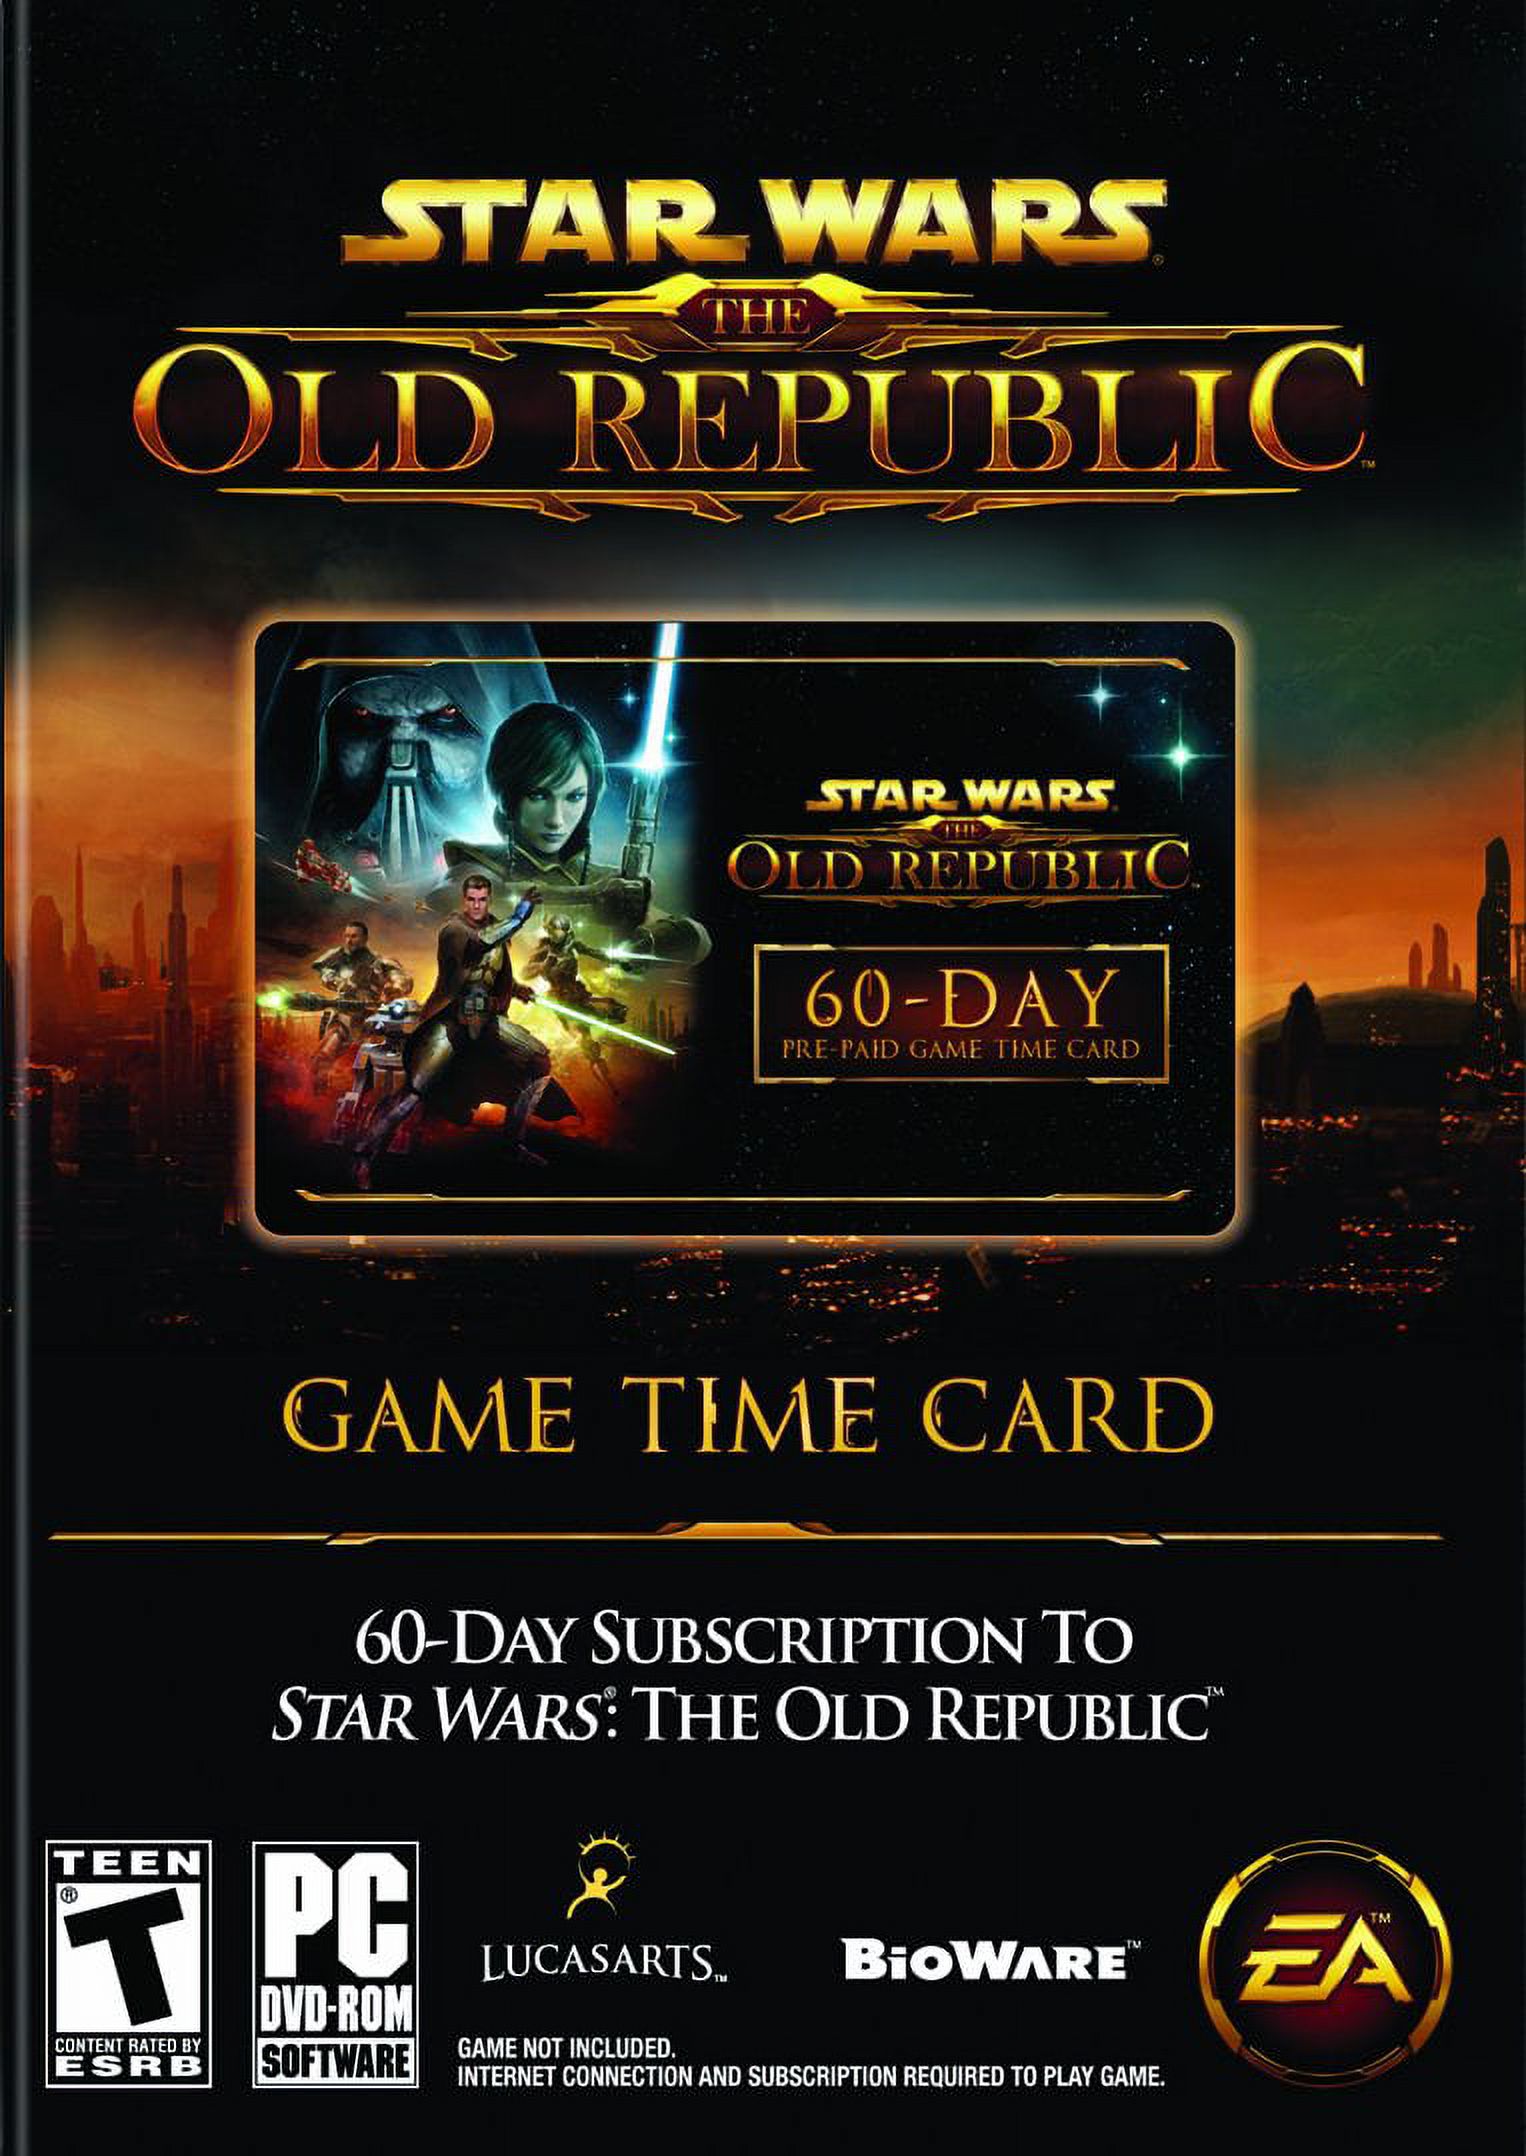 Electronic Arts Star Wars The Old Republic Pre-Paid Time Card, EA, PC Software, 014633197969 - image 3 of 4